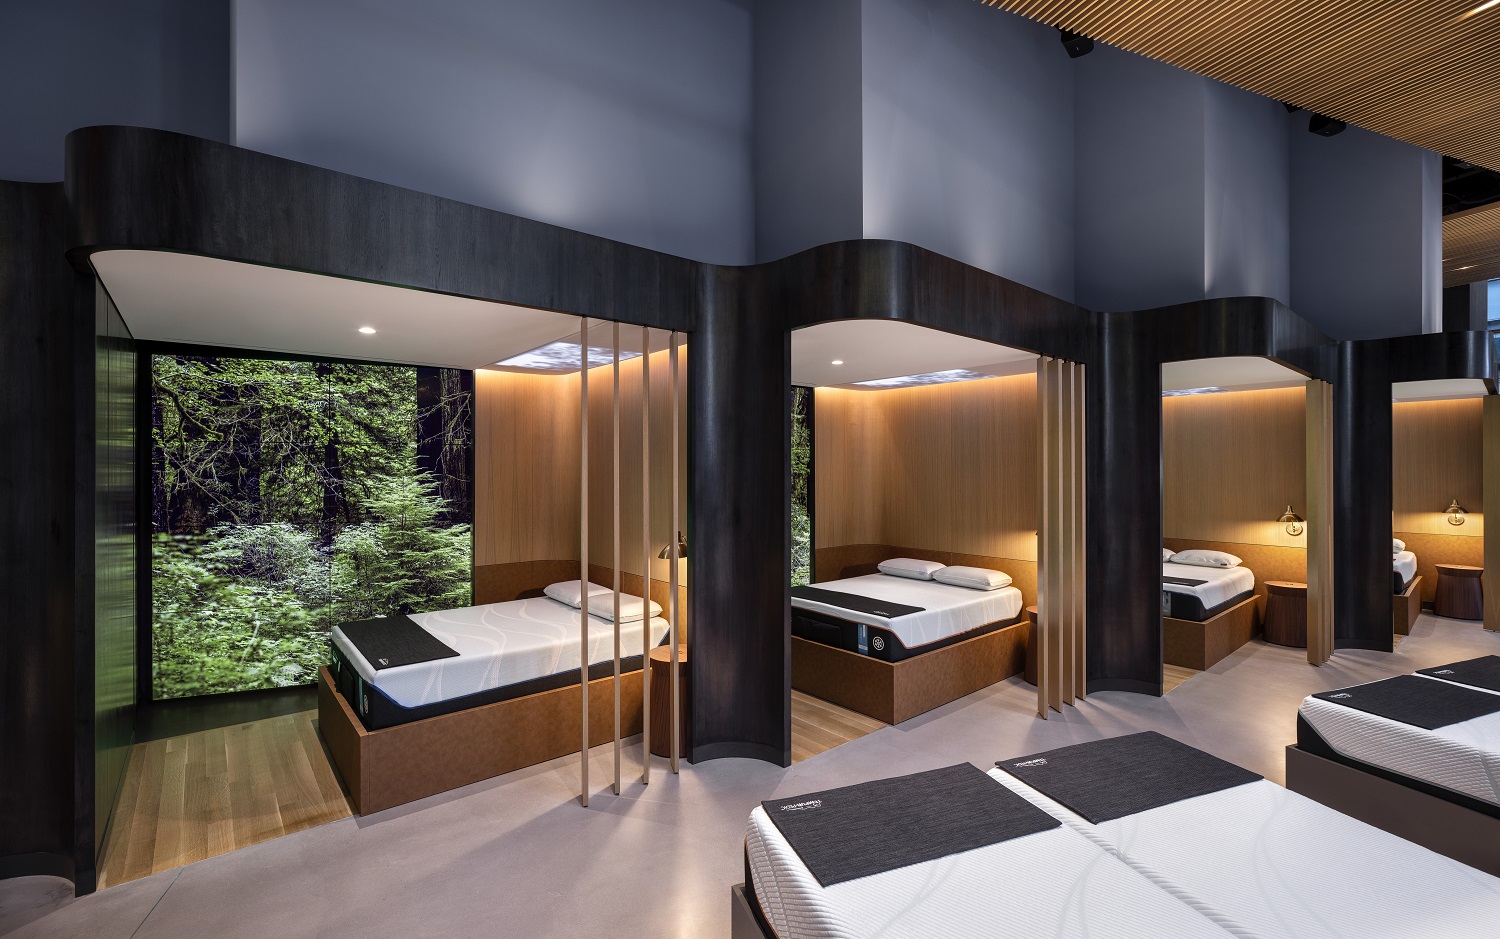 Photo of Tempur-Pedic showroom showing fours mattresses located in semi-private spaces on wooden floors with window-sized screens of a forest.